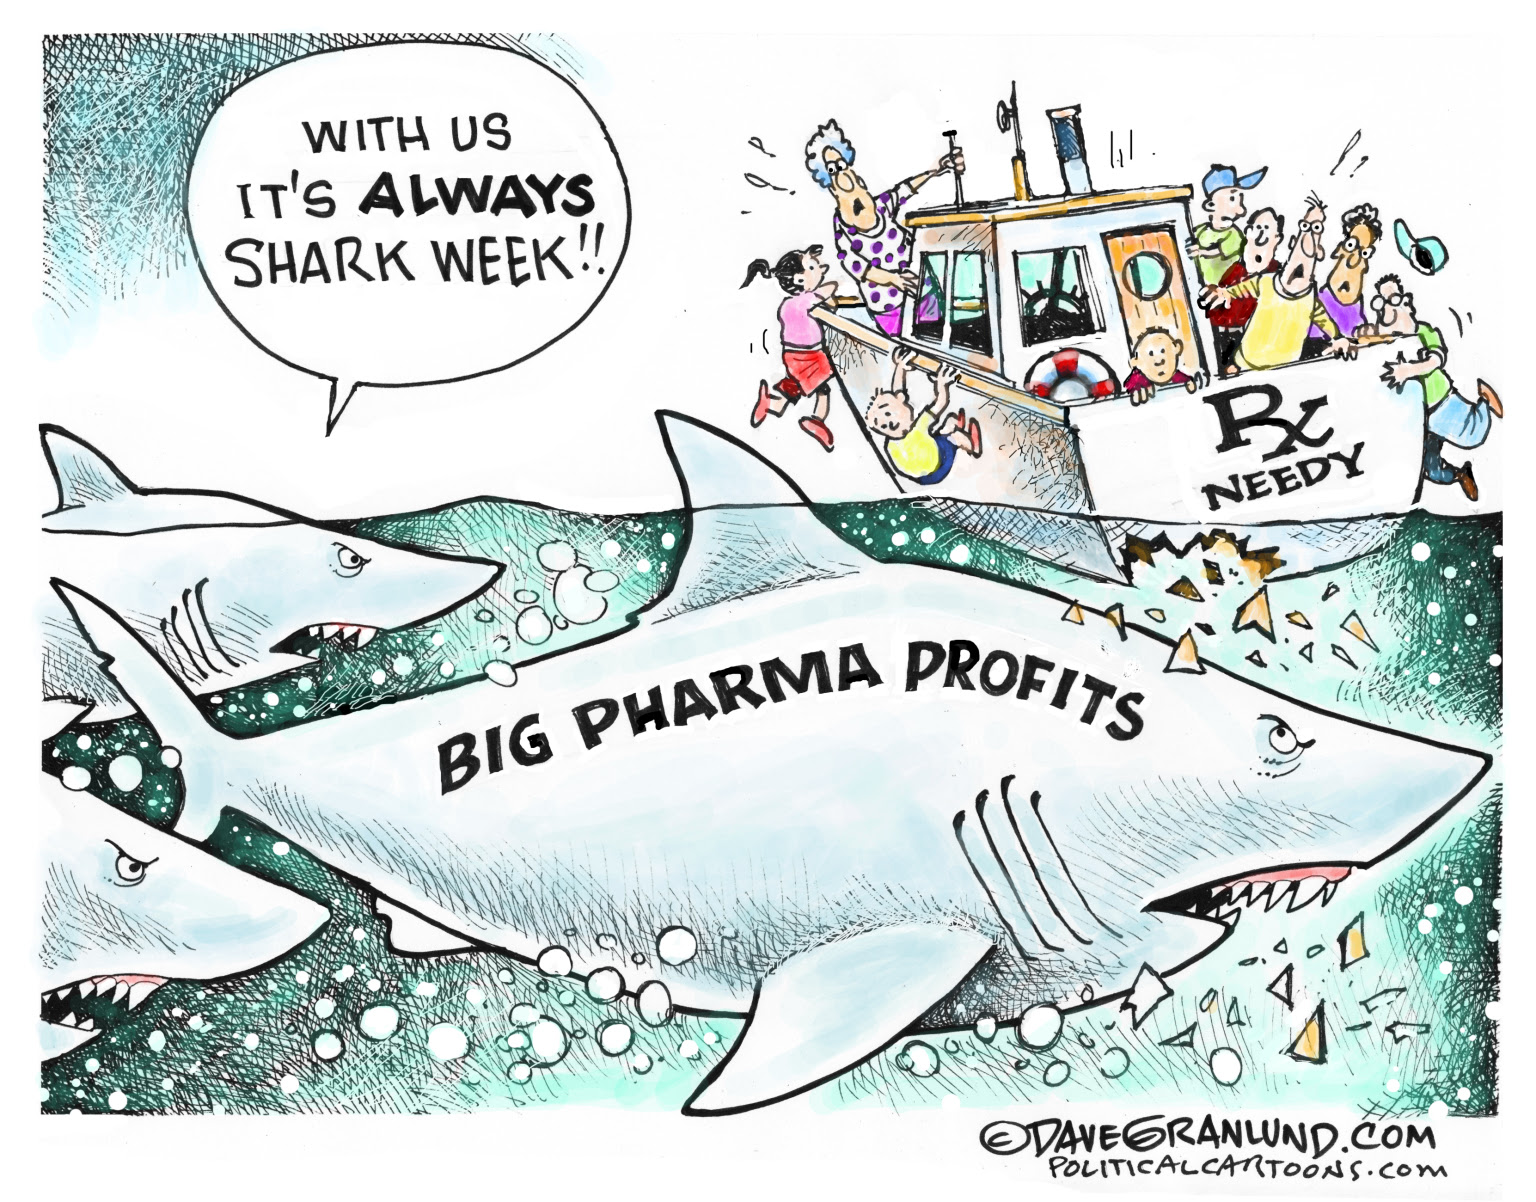 Big pharma profits surge as they donate to Republicans to keep drug prices high